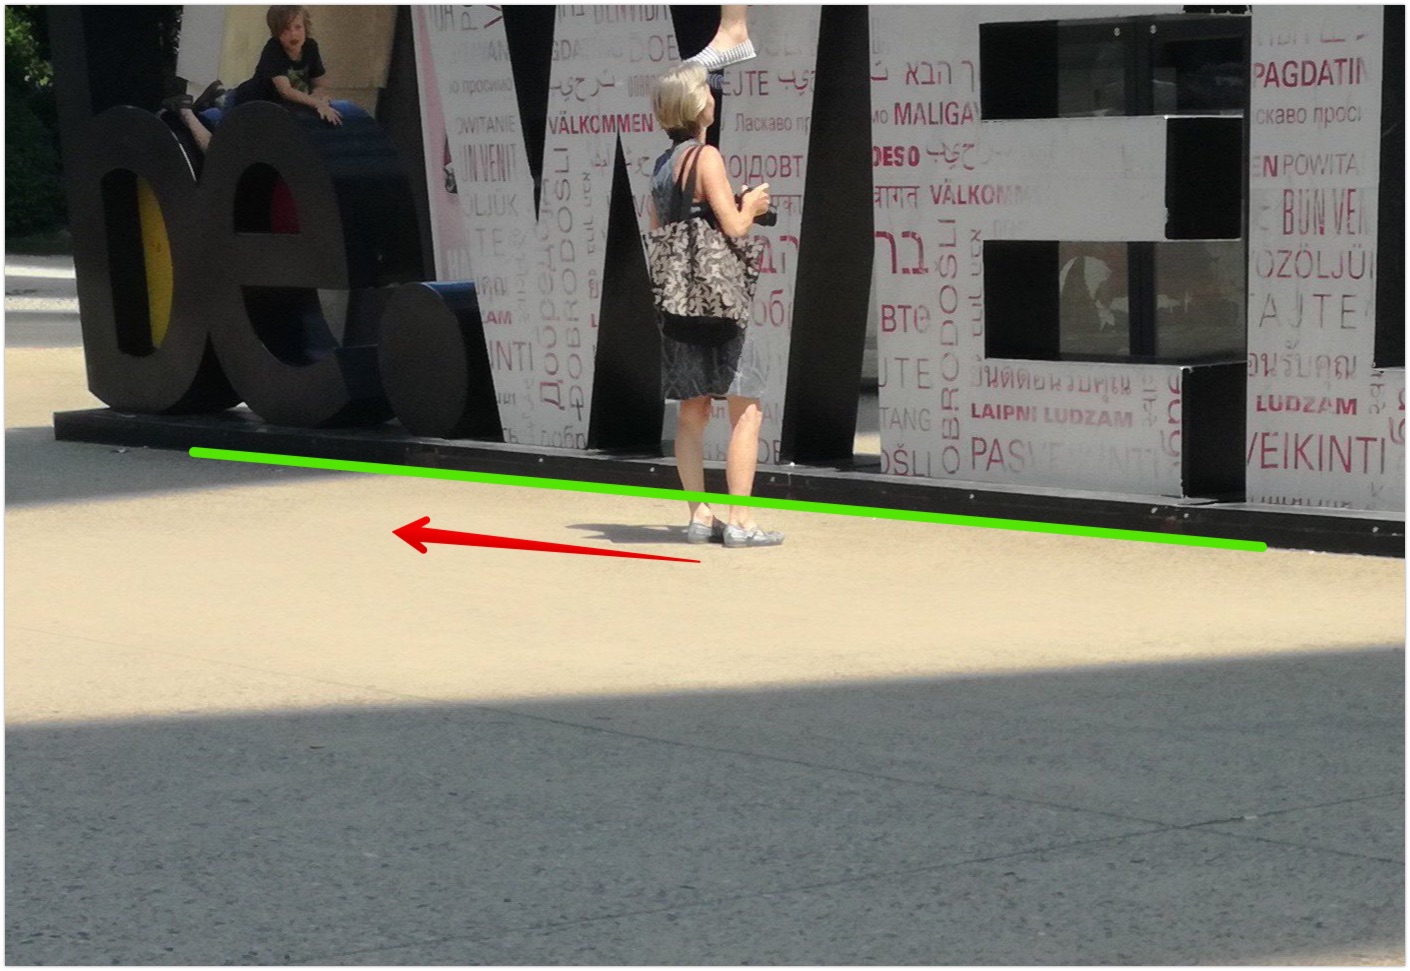 Estimating the direction of the shadow